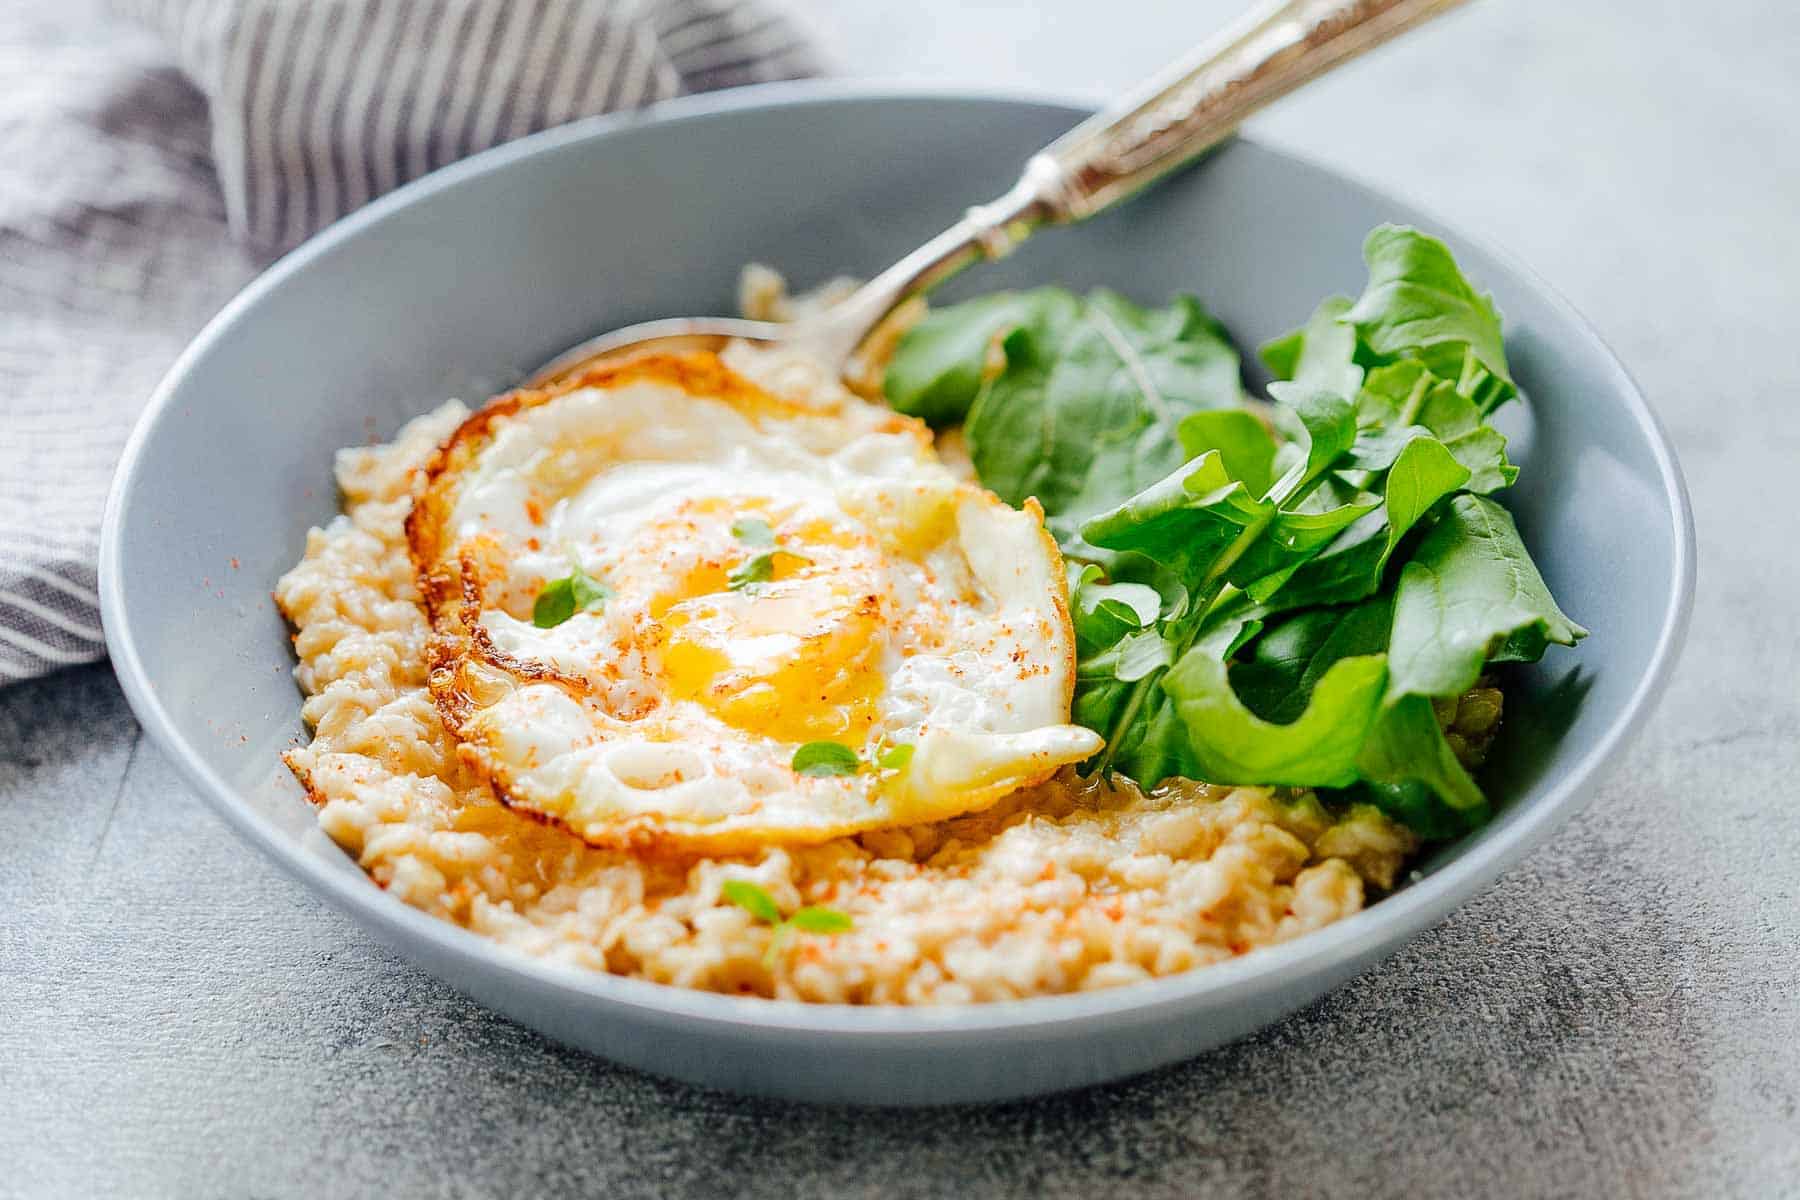 hese savory garlic oats with a masala fried egg are healthy, delicious and a great way to switch up breakfast when you are bored of regular sweet oatmeal. The runny yolk adds a gorgeous creaminess and the crispy edges add crunch. Make it a breakfast salad bowl with mixed greens or toss it up with some spices for a really satisfying breakfast.